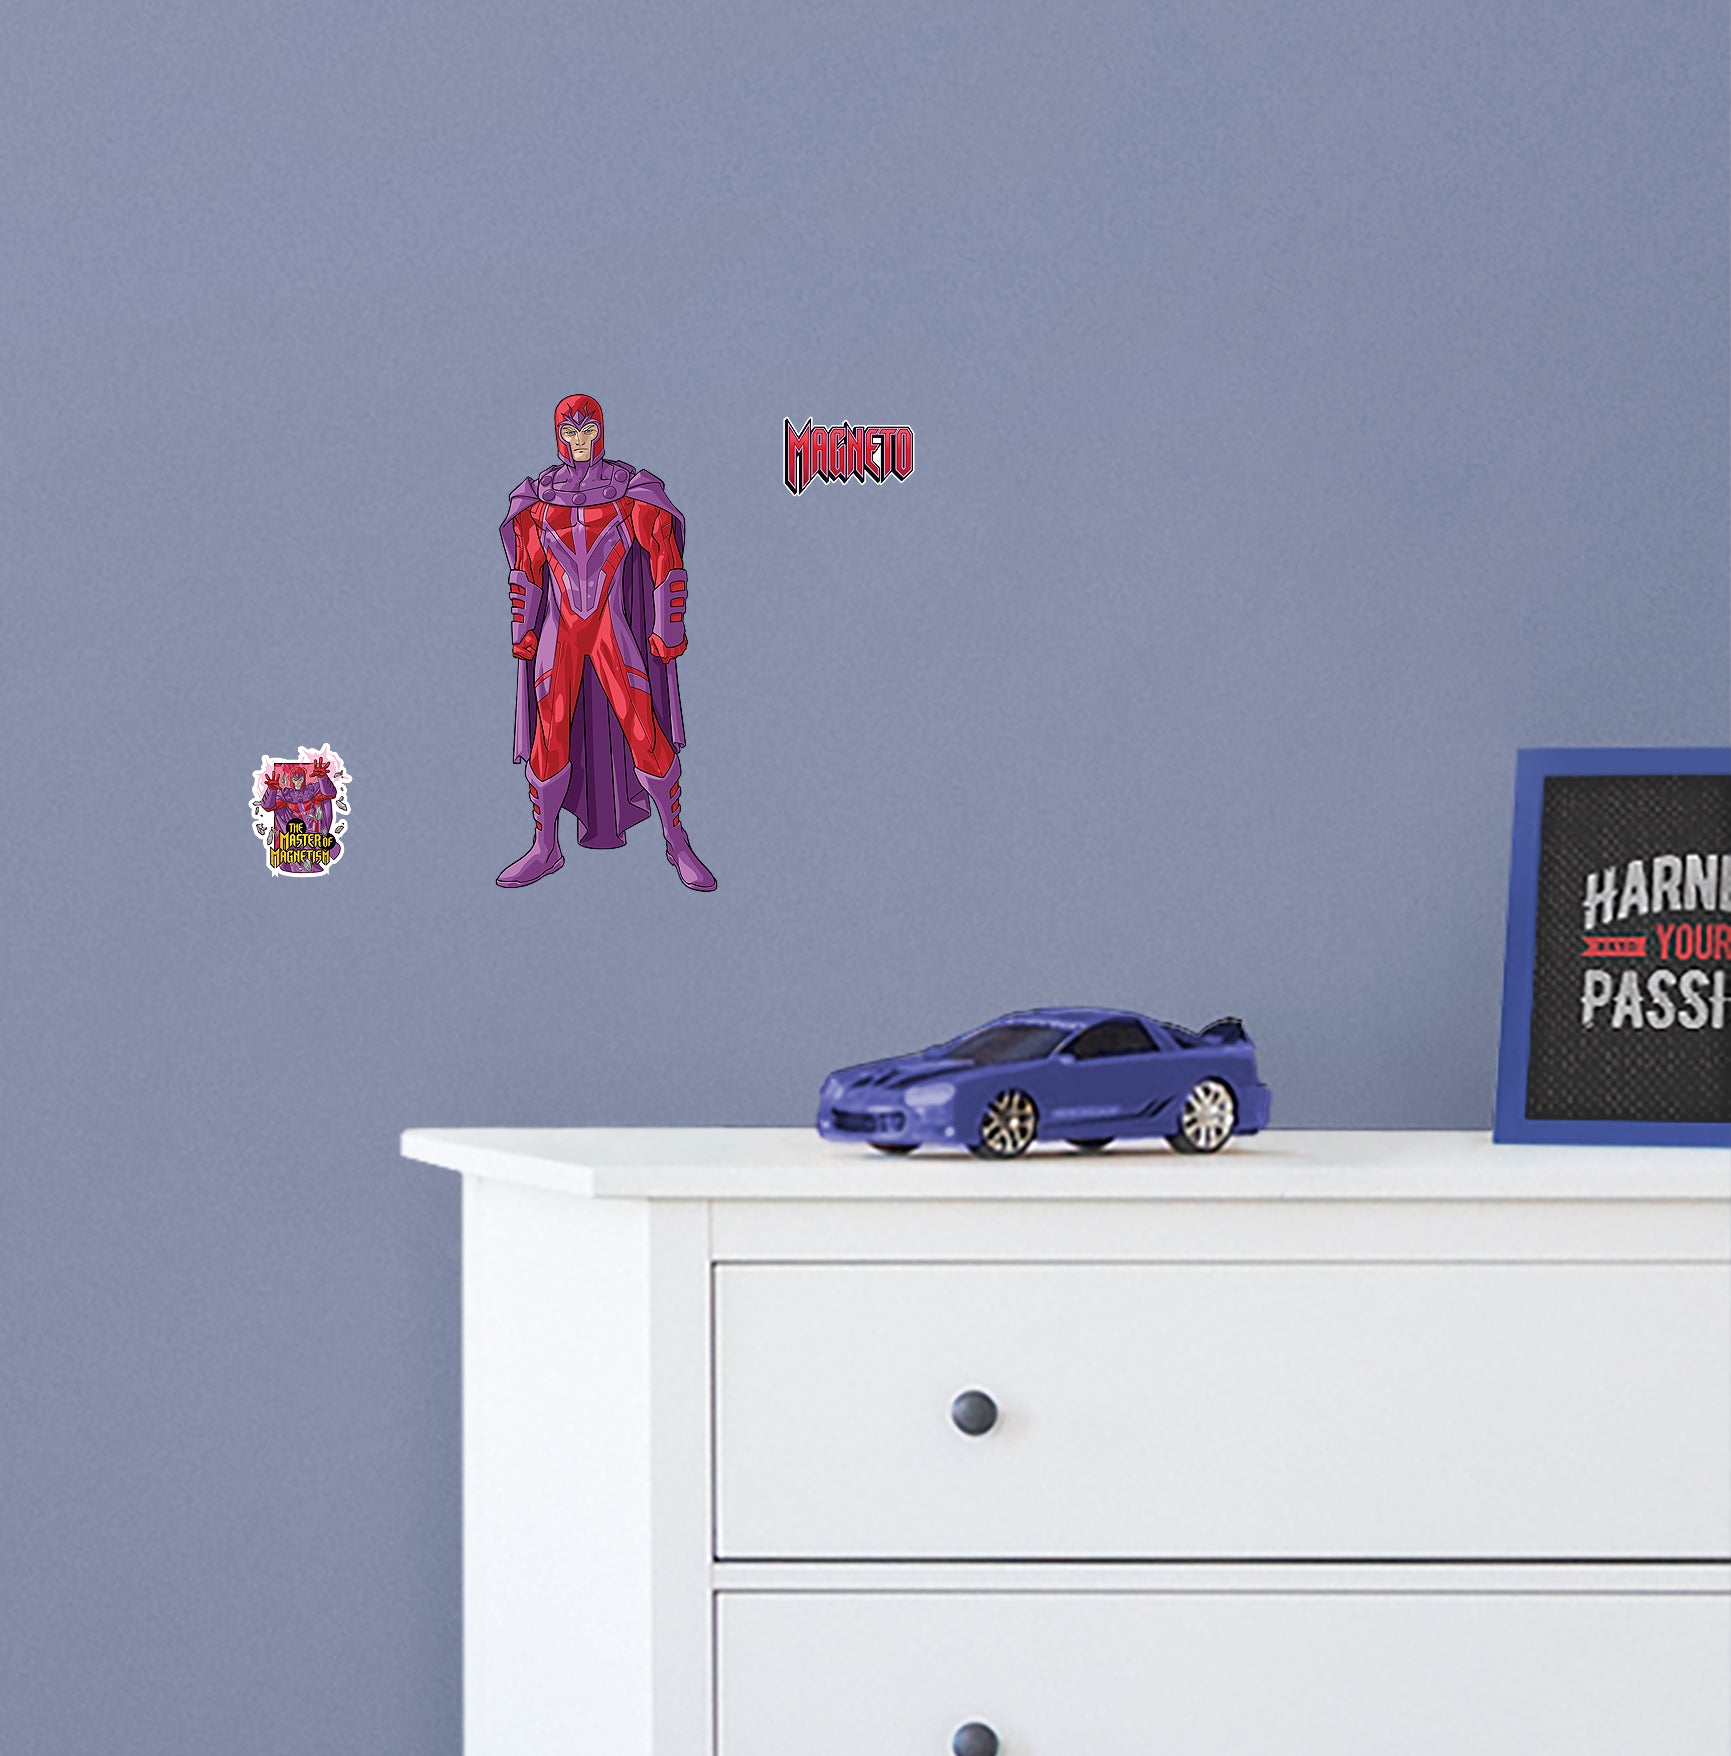 X-Men Magneto RealBig - Officially Licensed Marvel Removable Wall Decal Large by Fathead | Vinyl